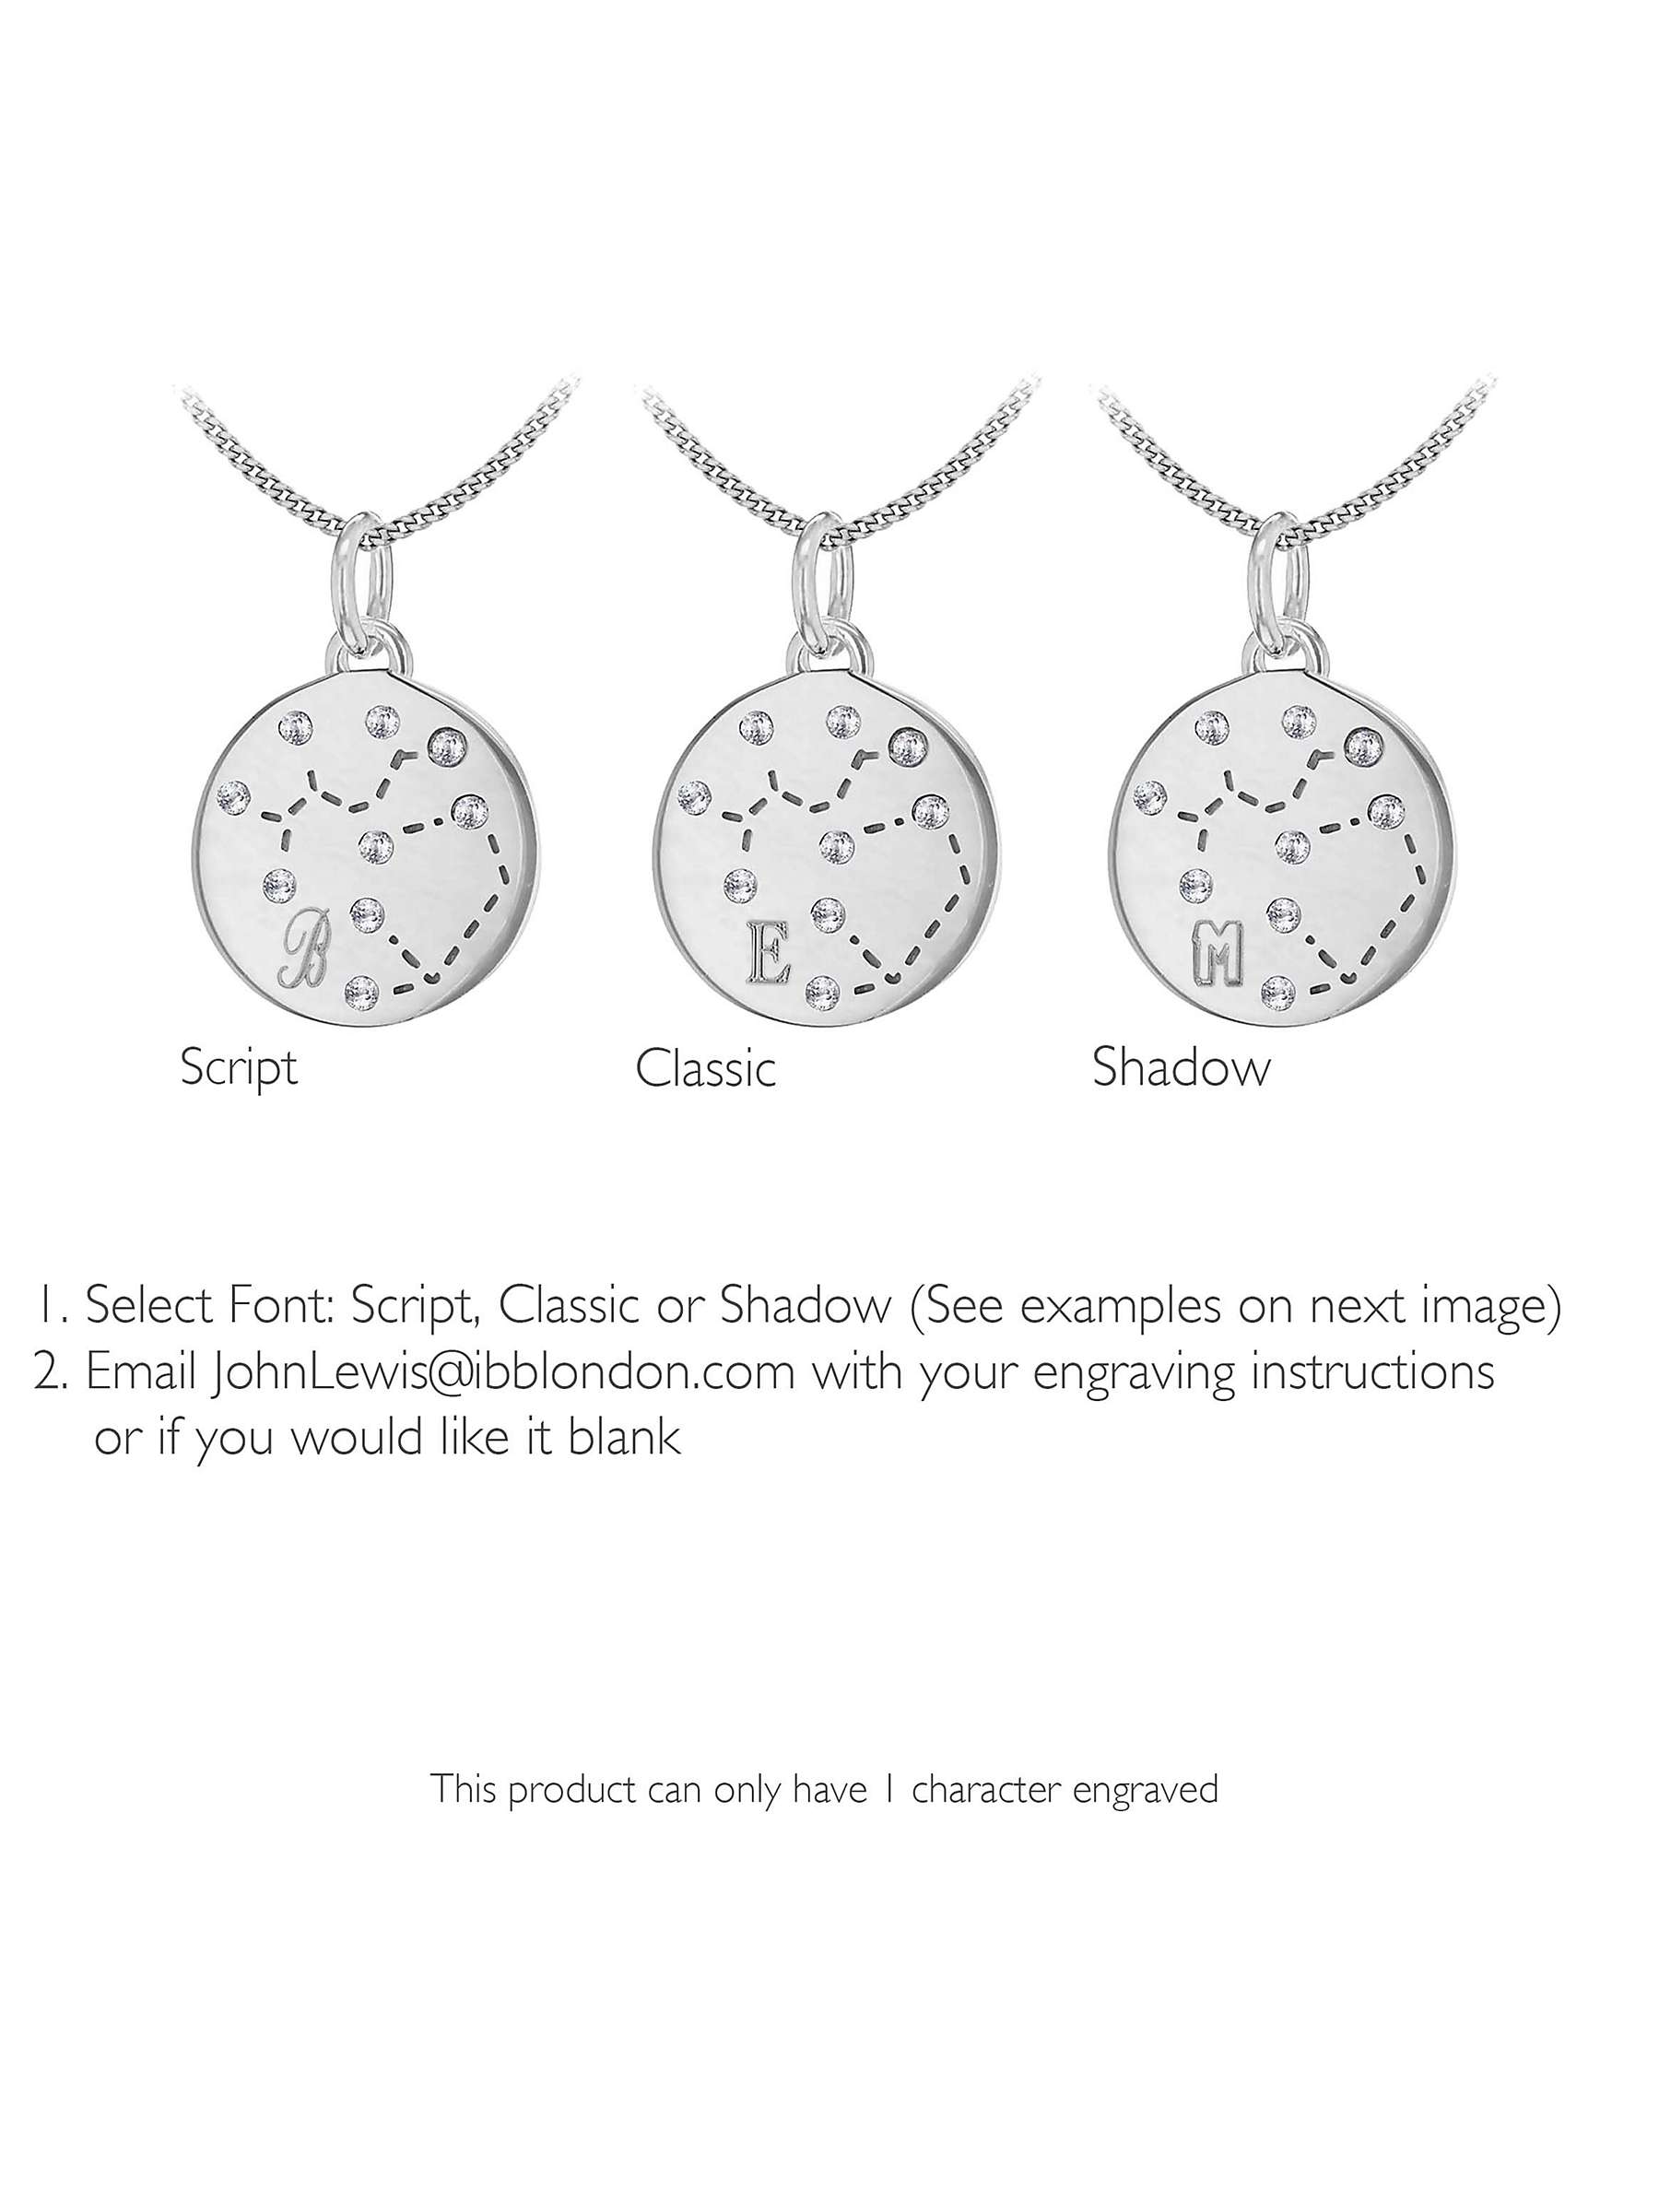 Buy IBB Personalised Sagittarius Star Sign Disc Pendant Necklace, Silver Online at johnlewis.com